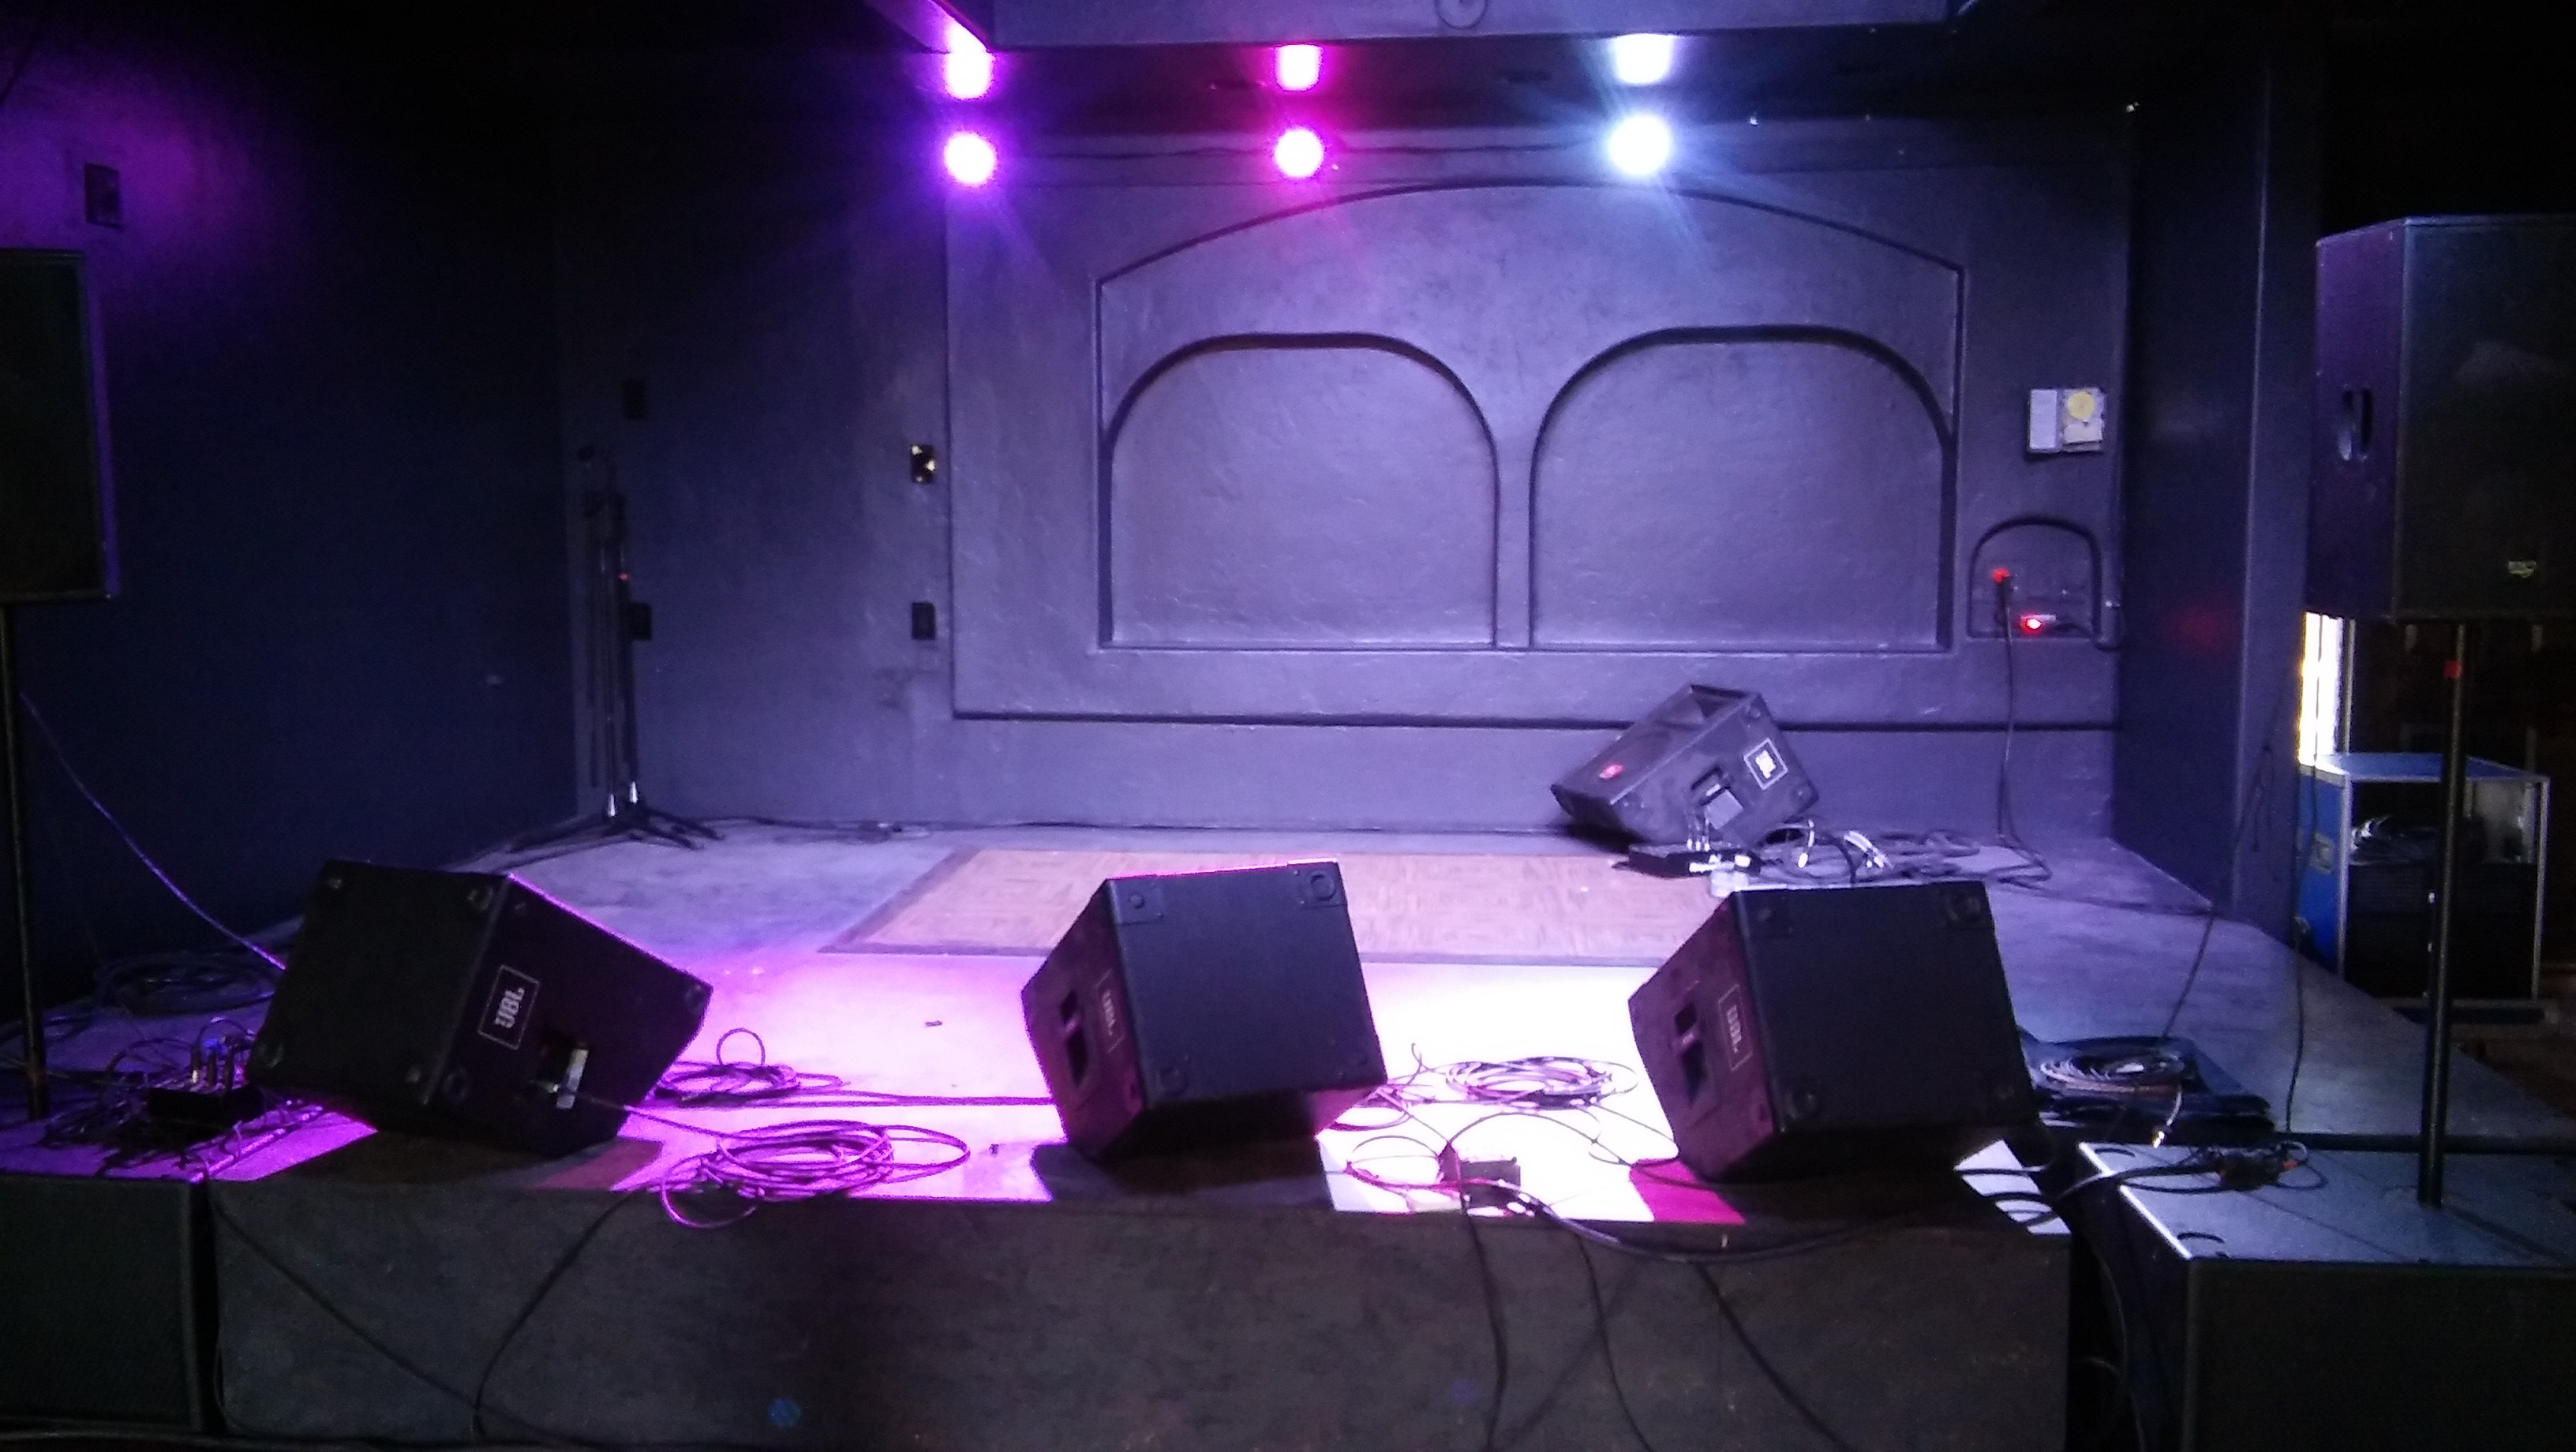 House of Bards, Tucson, AZ - Booking Information & Music Venue Reviews